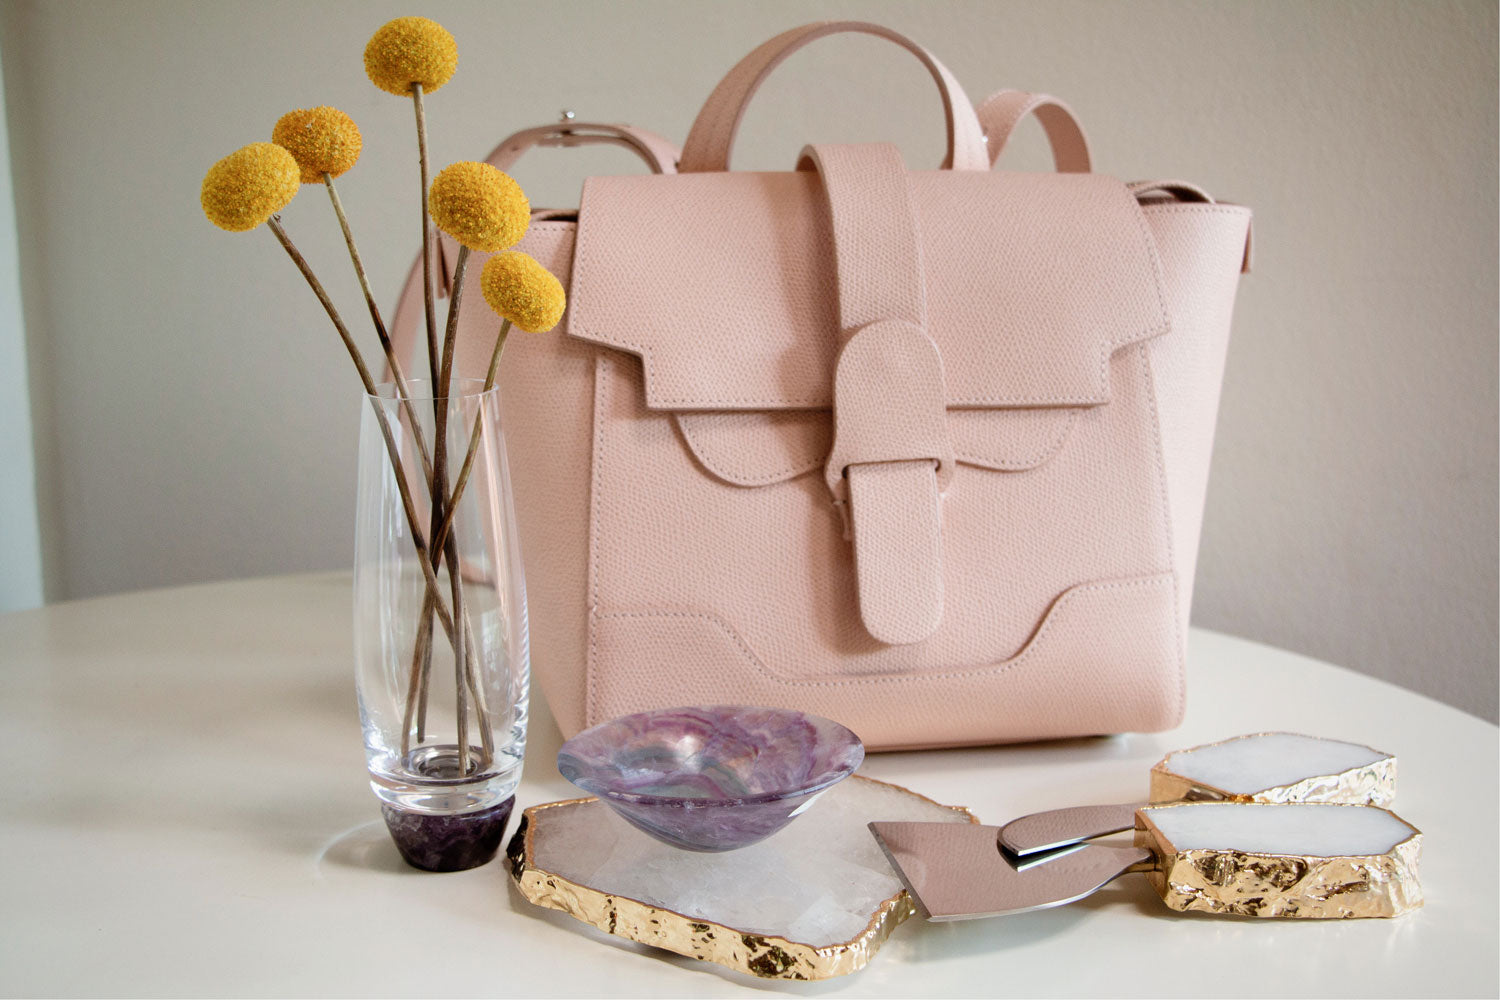 SENREVE Maestra Bag with ANNA products